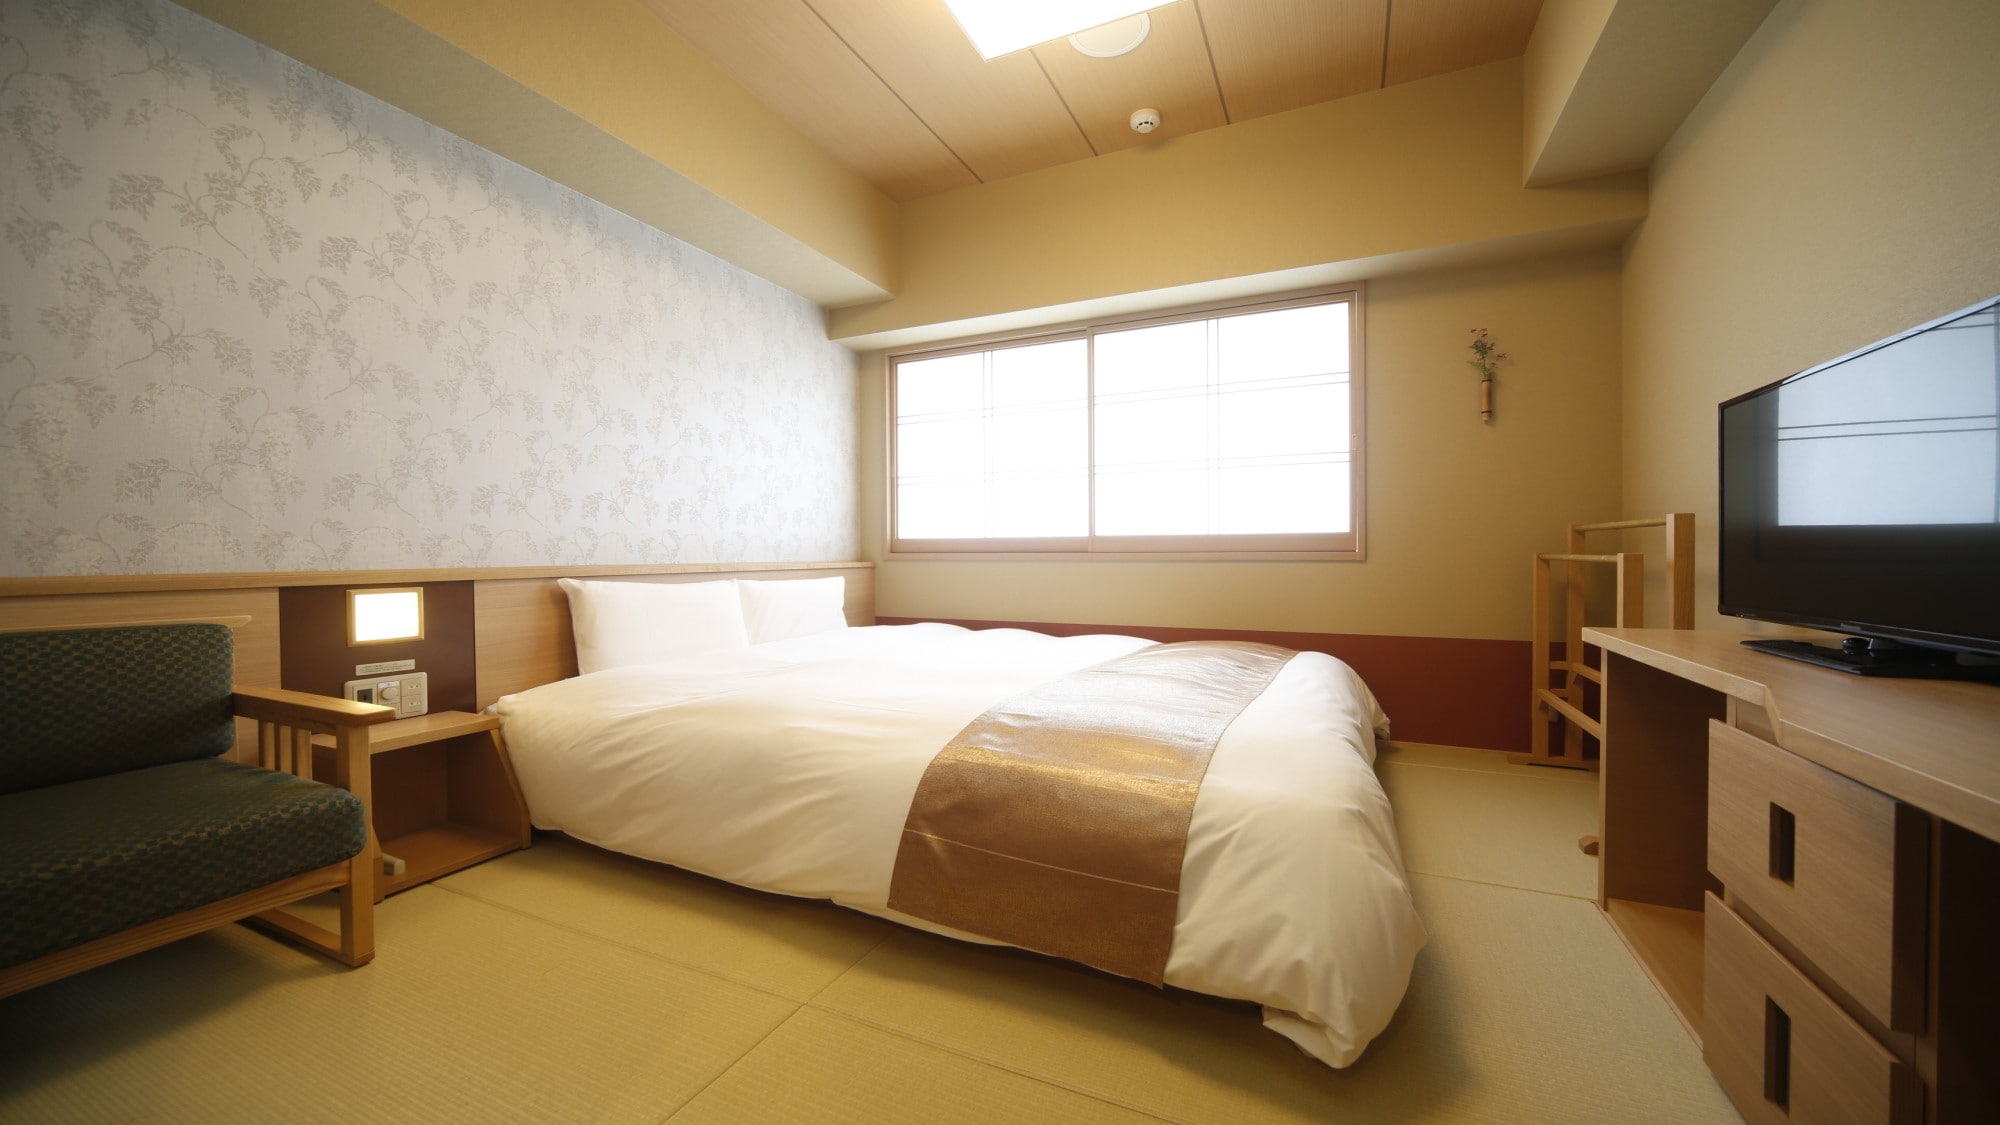 Queen Room [Non-Smoking] (160 & times; 195 cm) 15.80-15.90 sqm ◆ Serta bed available ◆